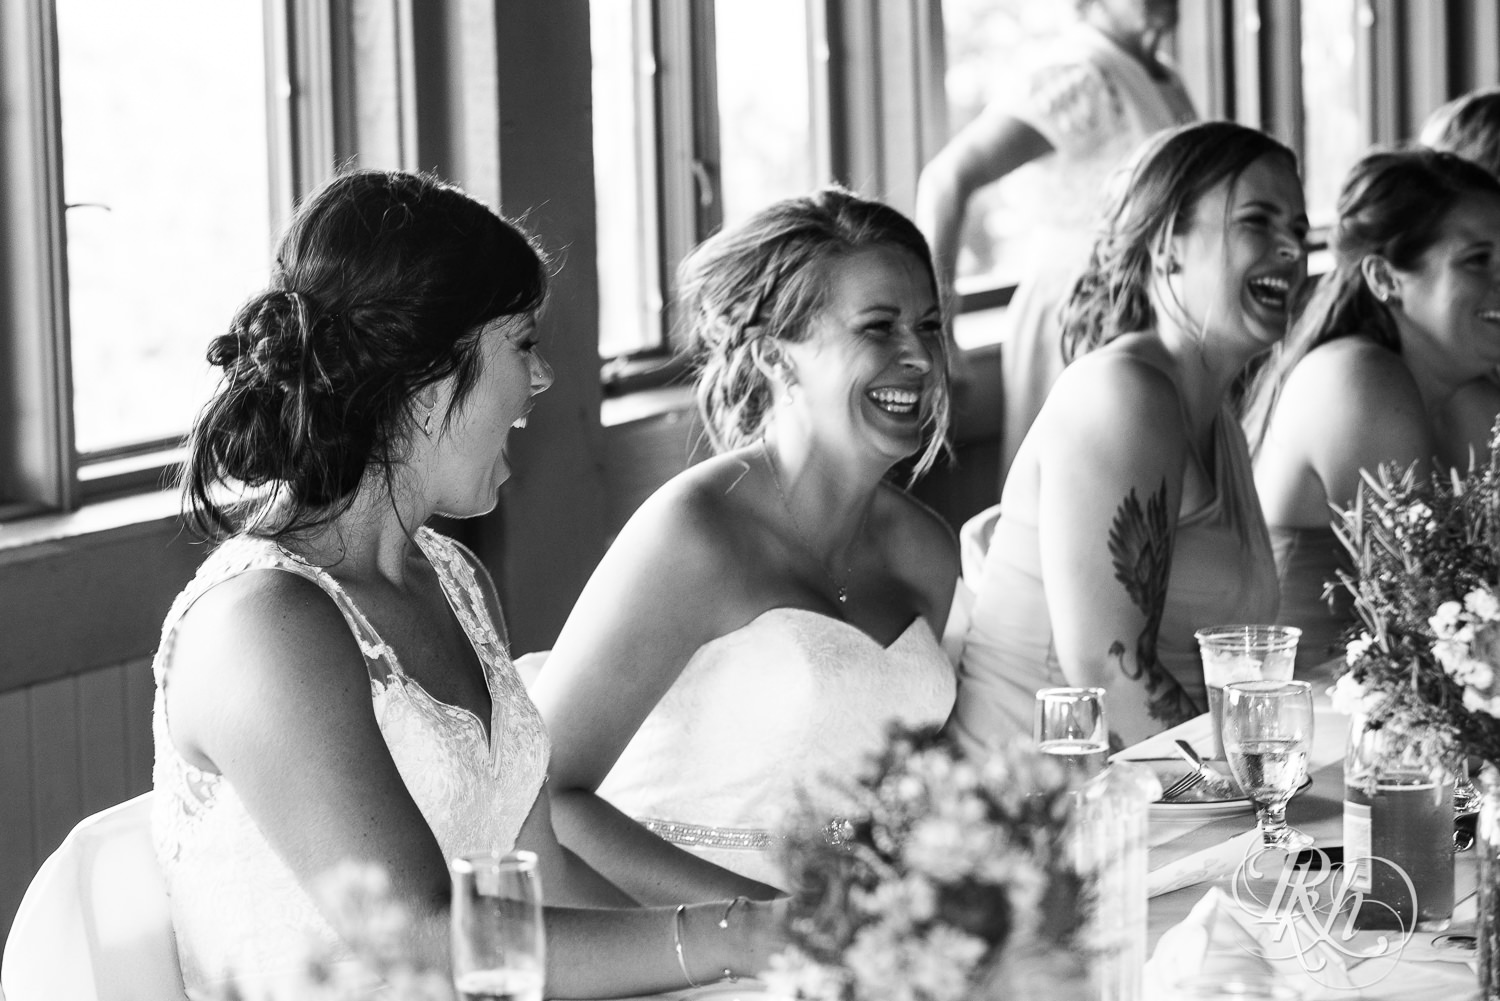 Lesbian brides smile at head table during their wedding reception at Spirit Mountain in Duluth, Minnesota.